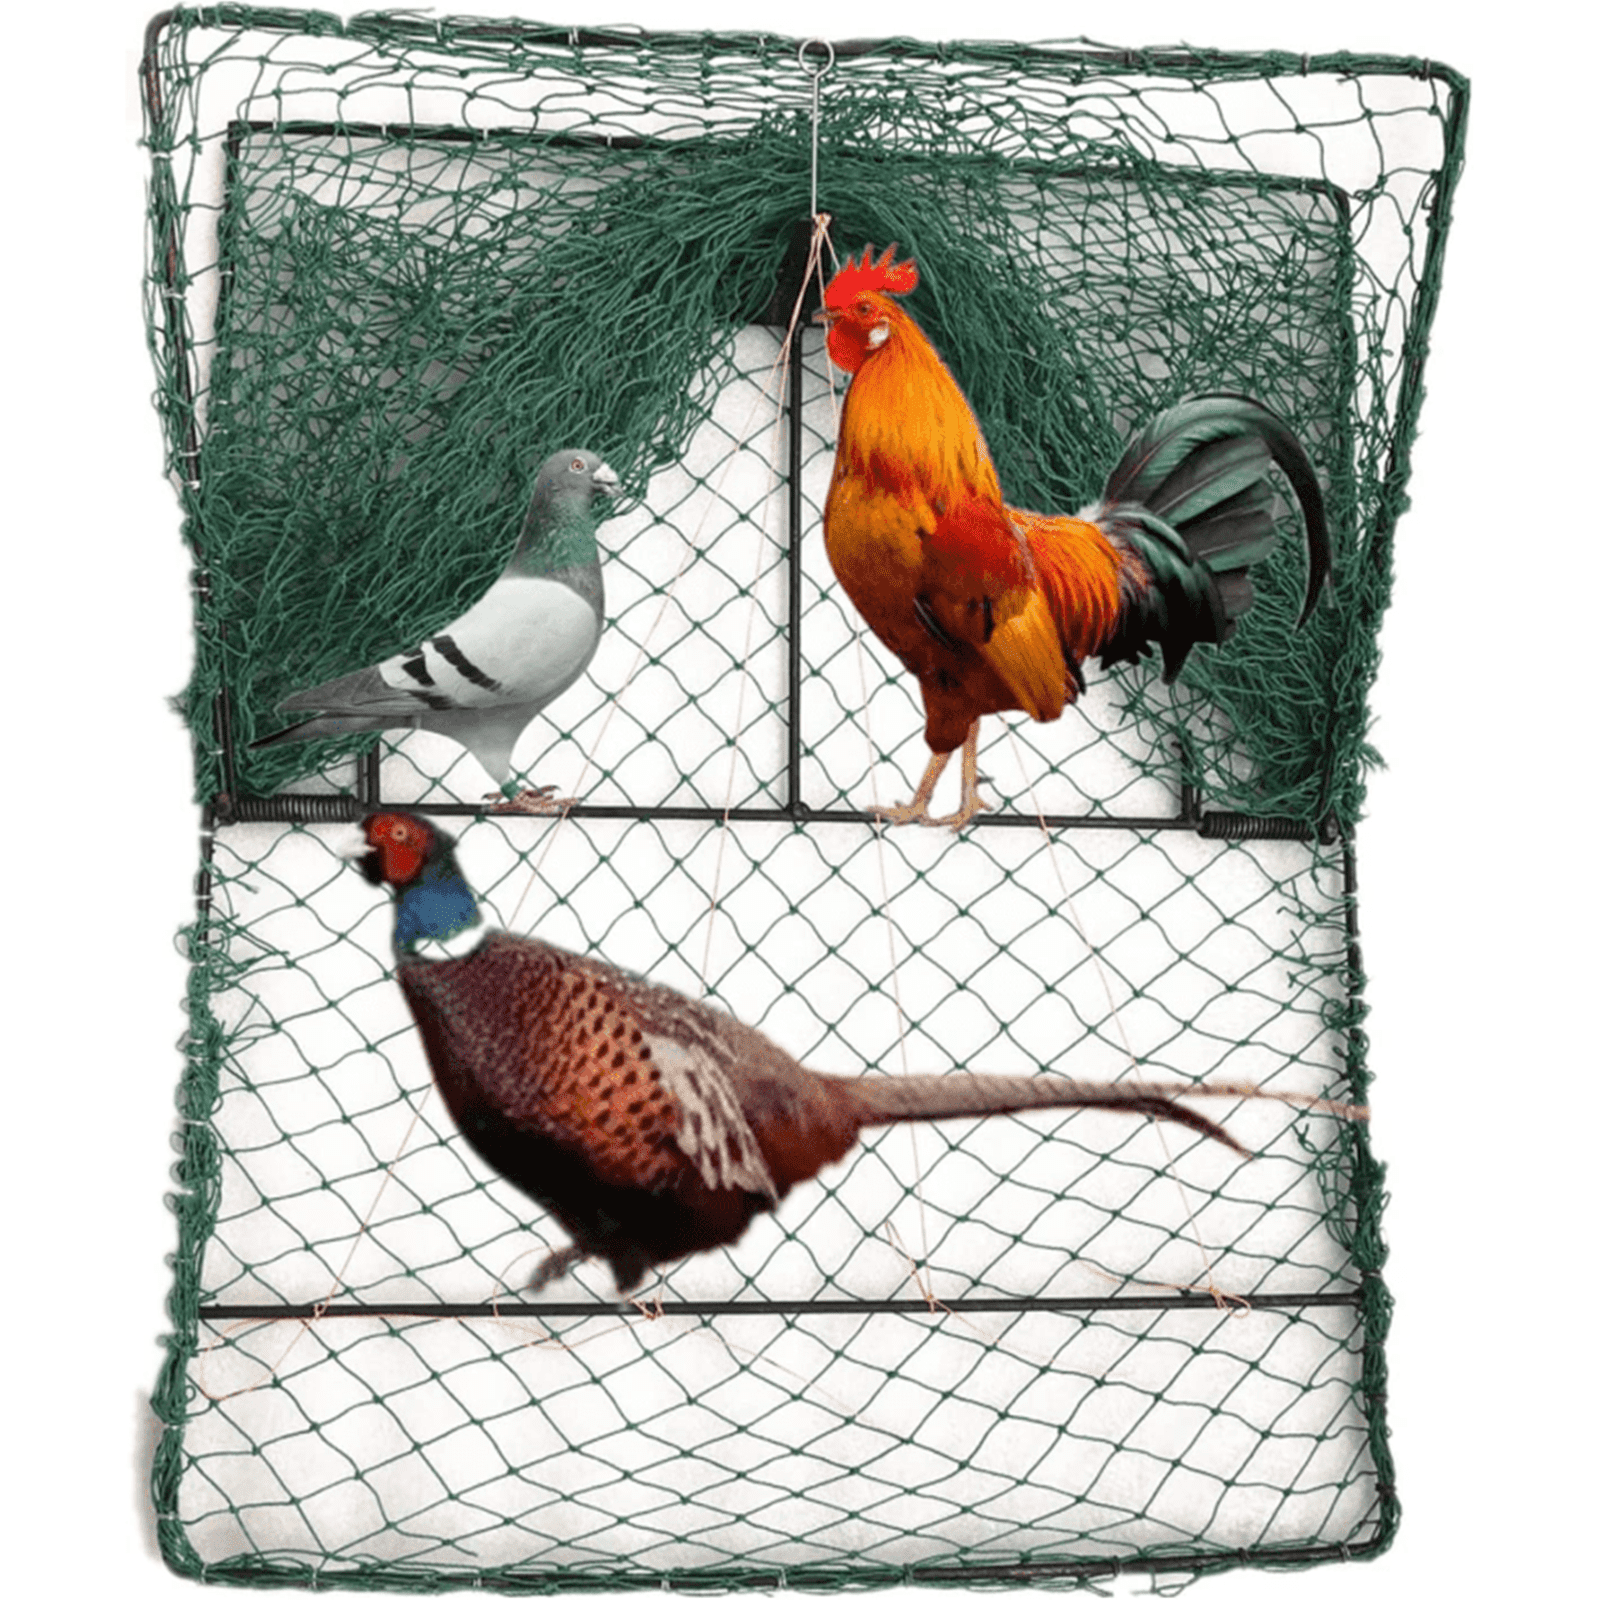 Bird Net Effective Human Live Mousetrap Rabbit Hunting Trapping Hunting  Bird Trap 15.75X13.78 Inches 